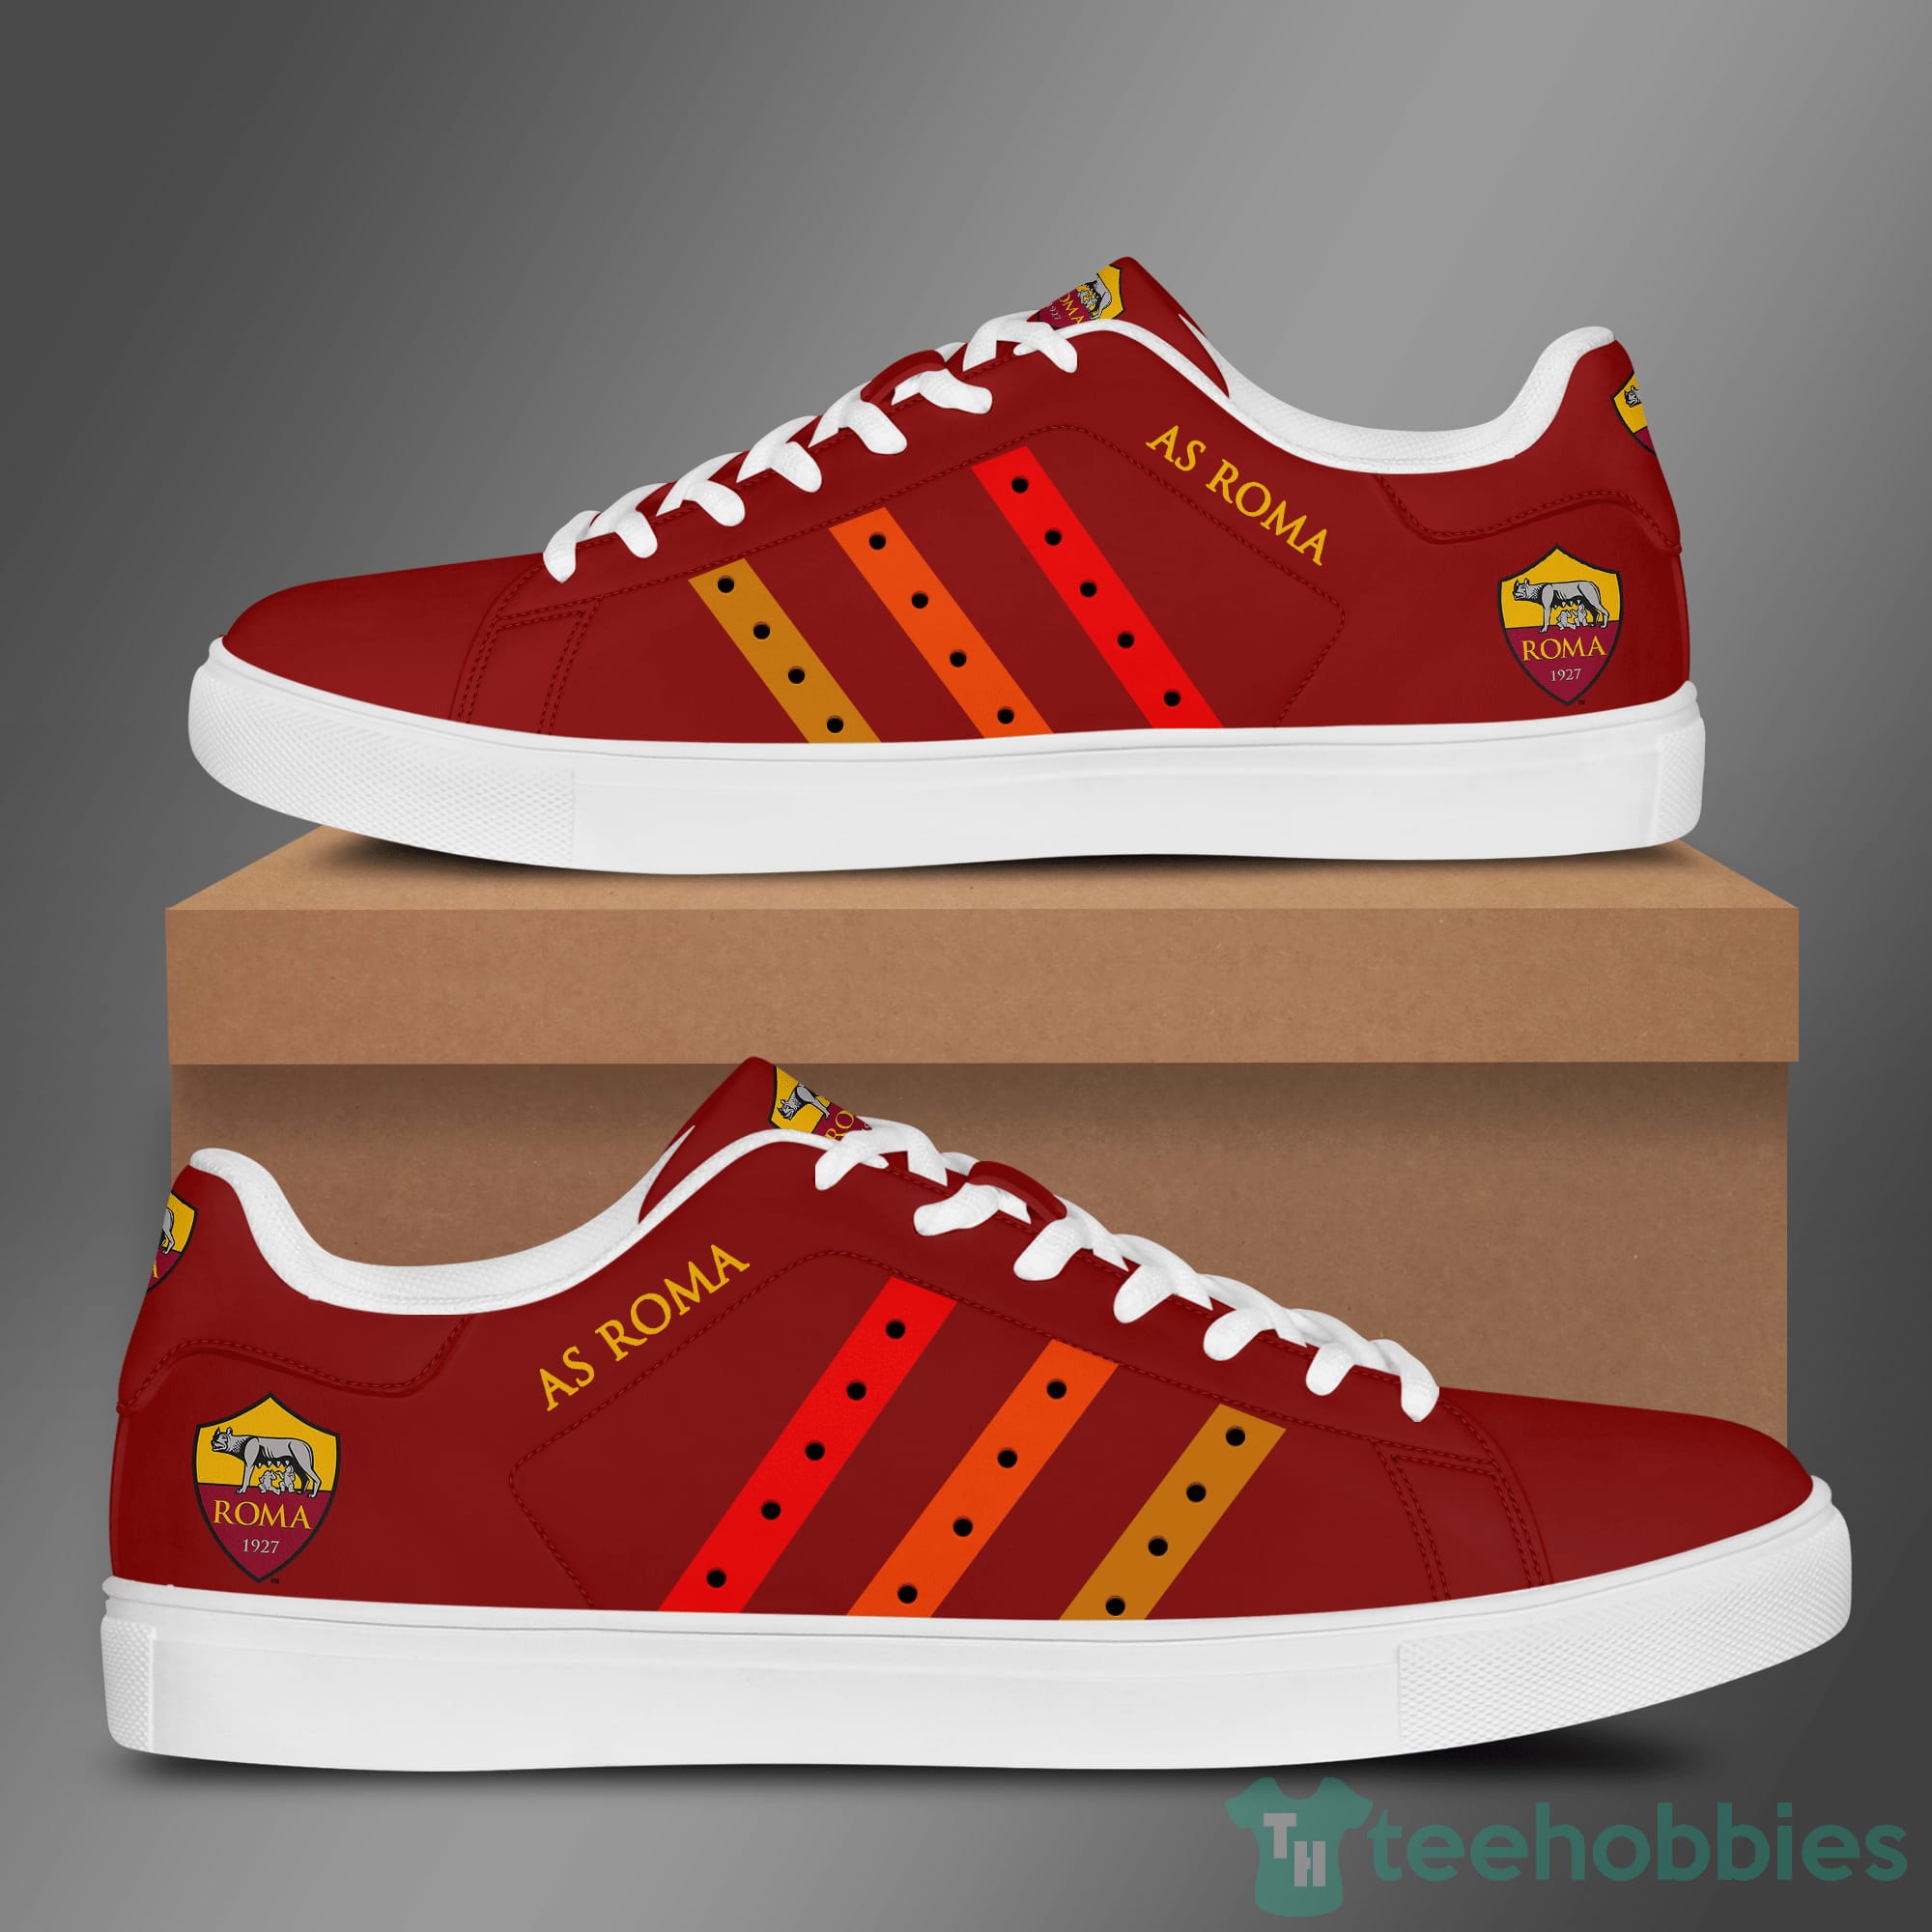 As Roma Red Low Top Skate Shoes Product photo 1